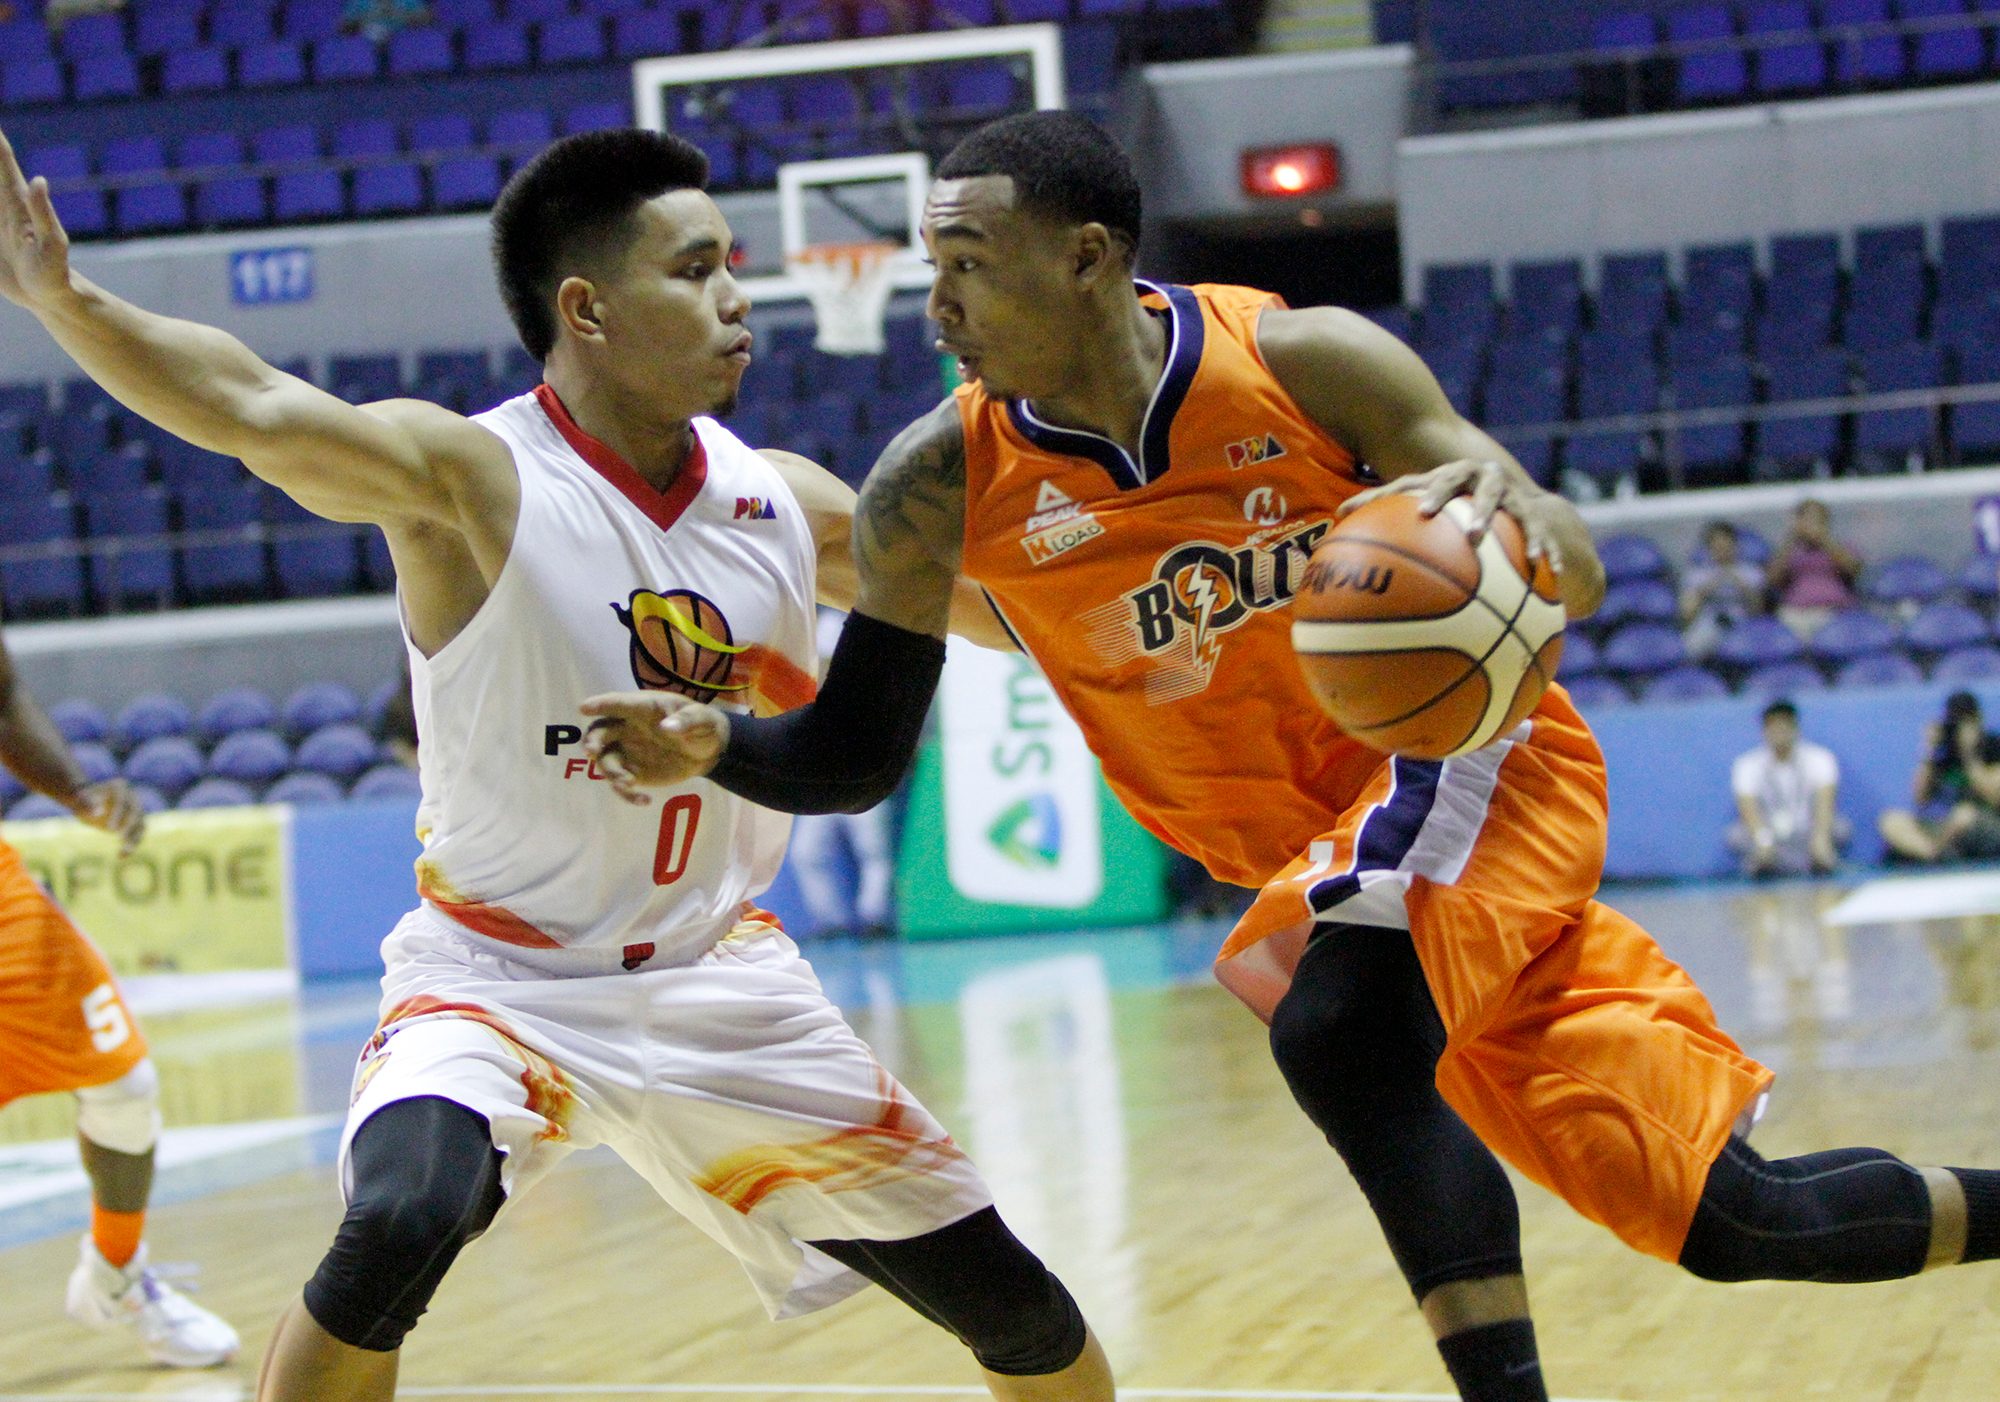 Chris Newsome is 2016 PBA Rookie of the Year